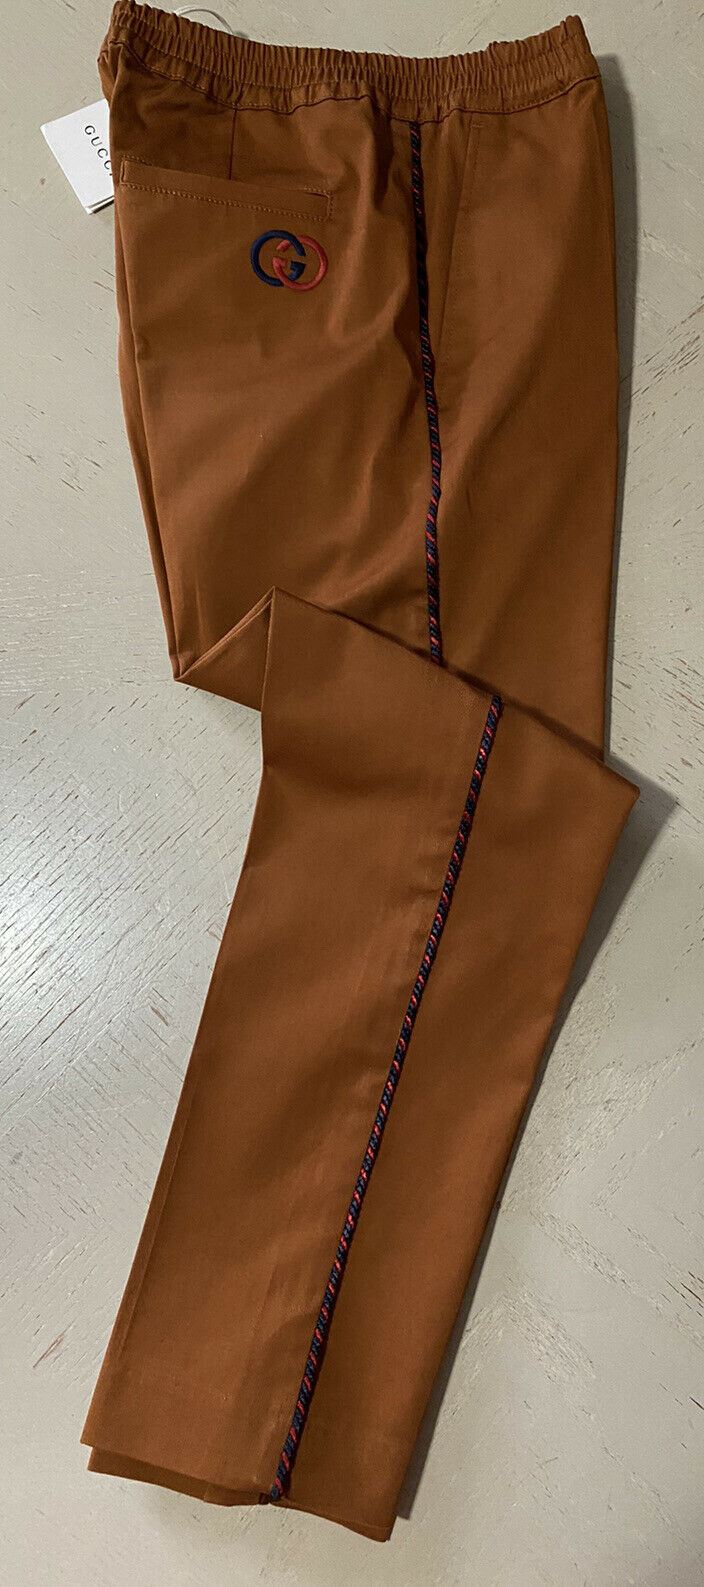 NWT Gucci Boys Dress Pants Brown Size 10 Italy